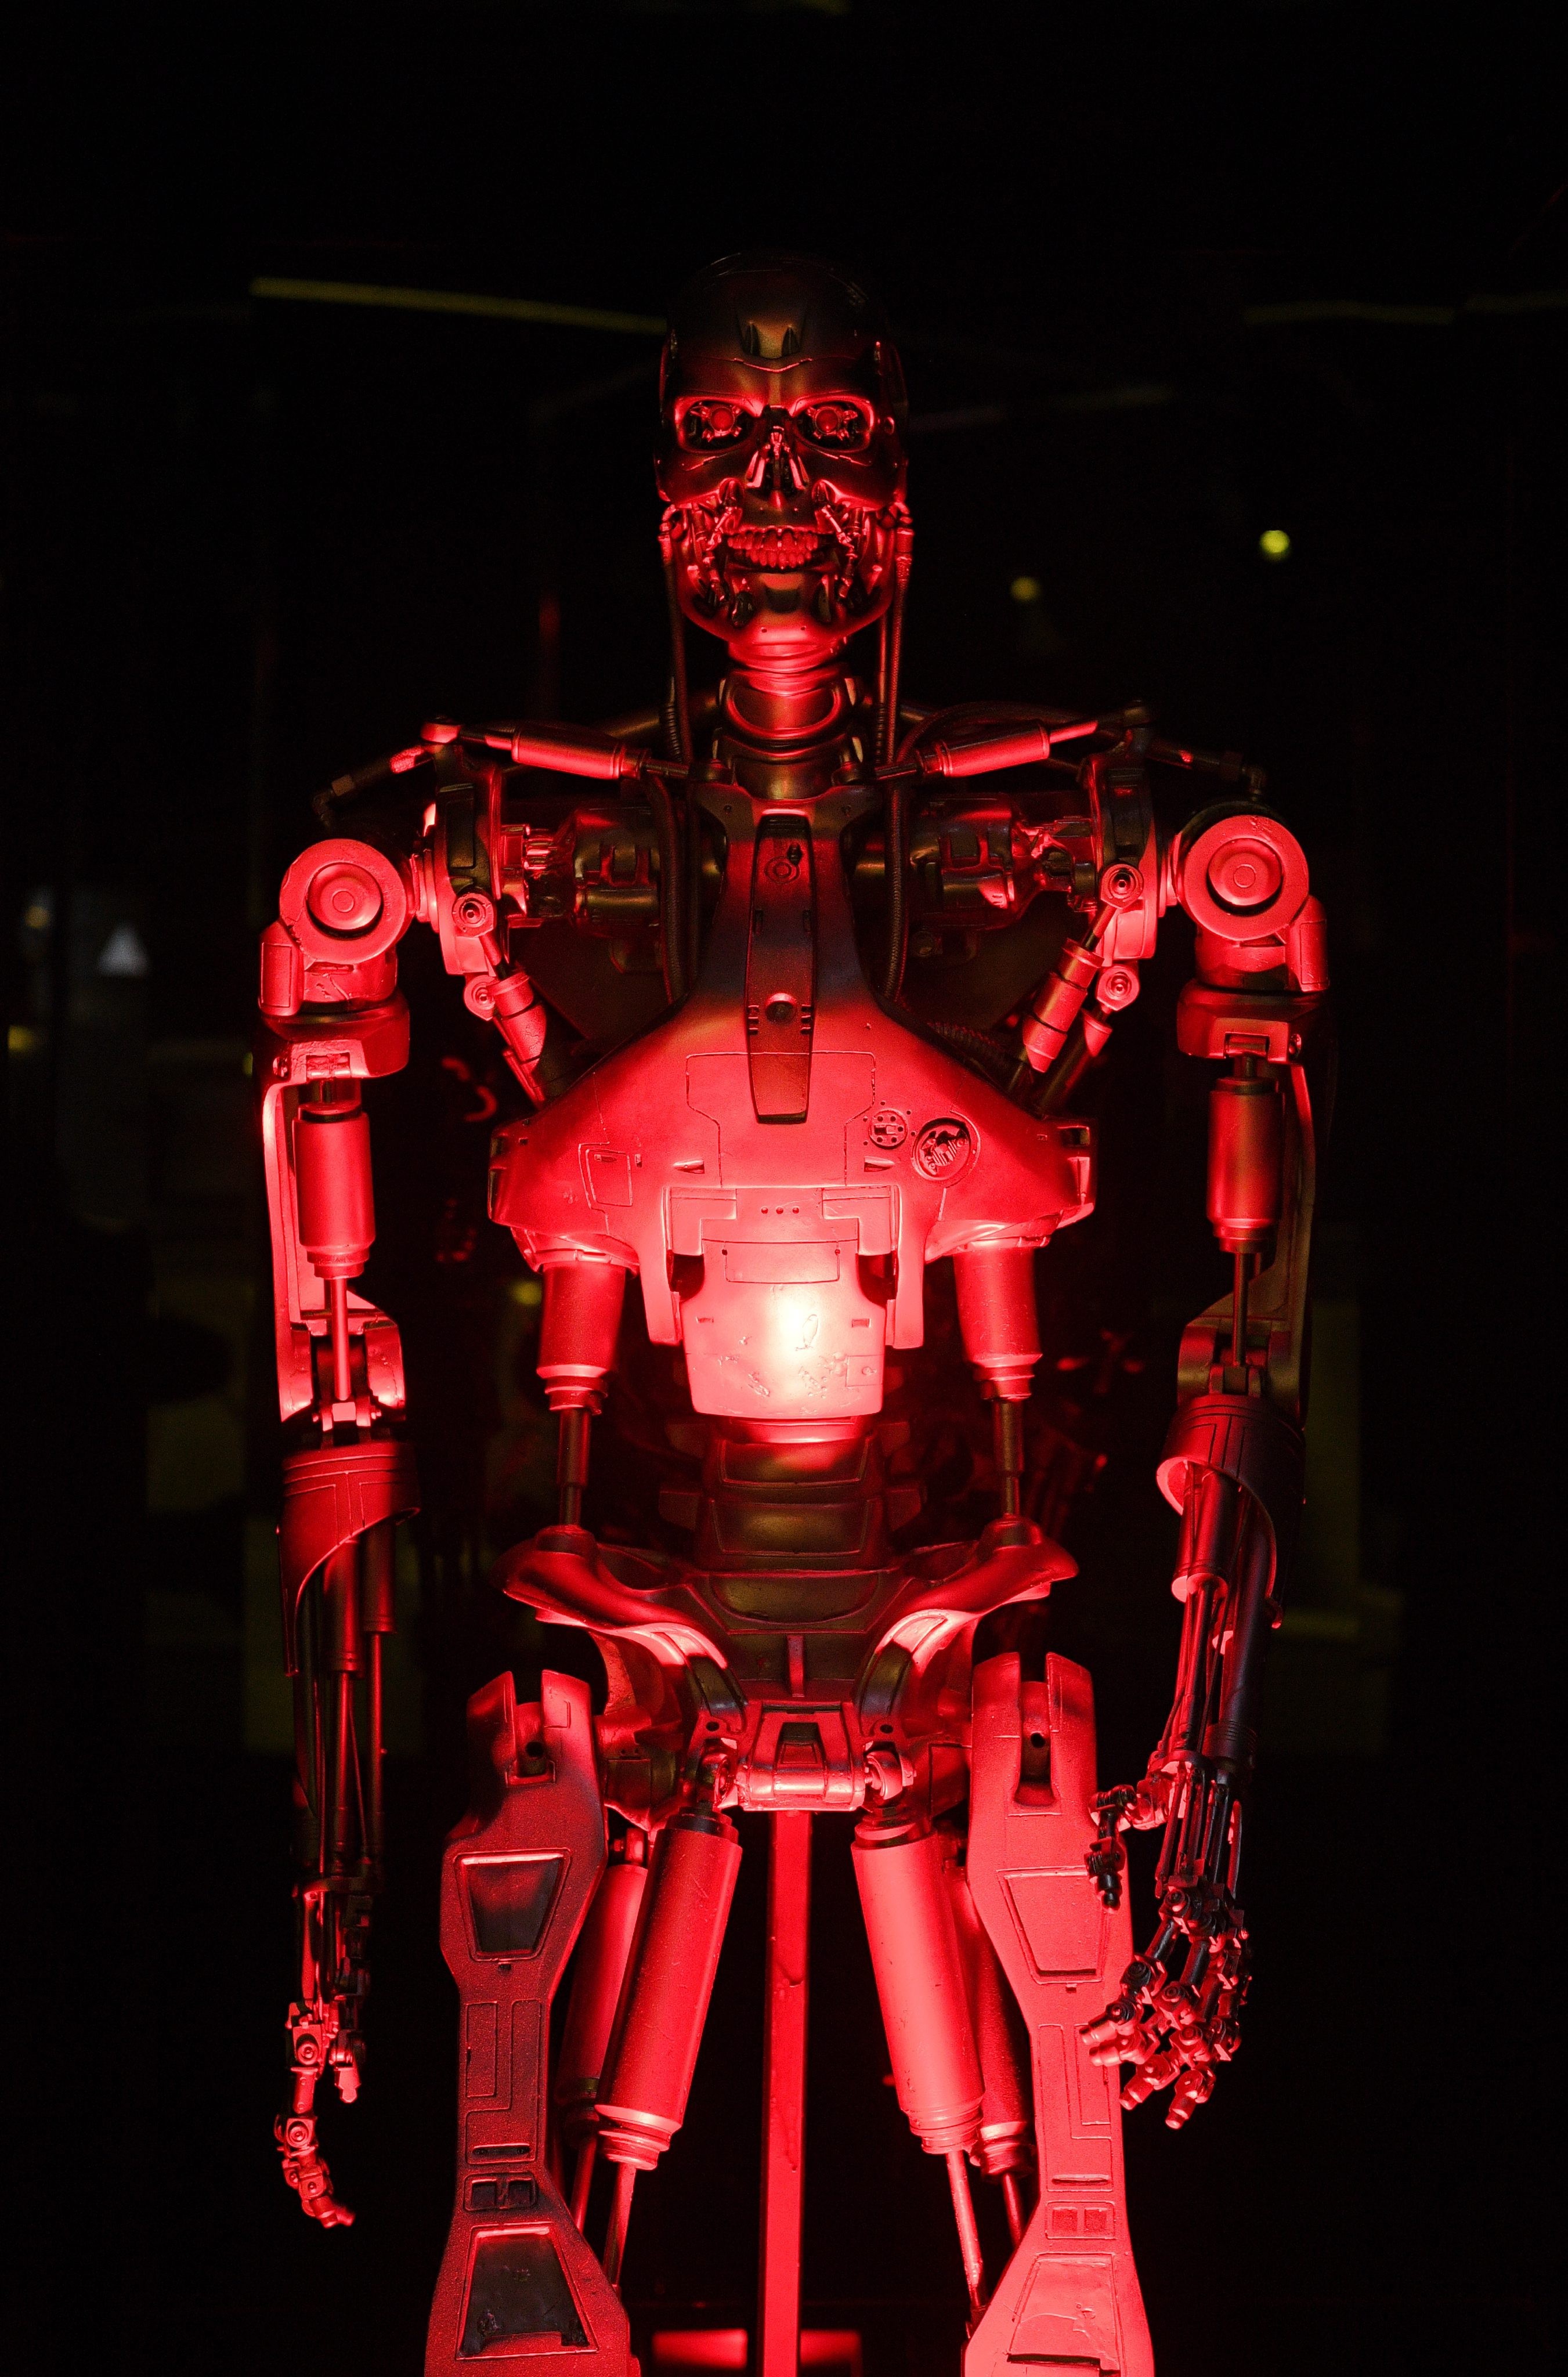 The original T-800 Endoskeleton robot used in the film 'Terminator Salvation' at the Science Museum in London. Photo: EPA/FACUNDO ARRIZABALAGA